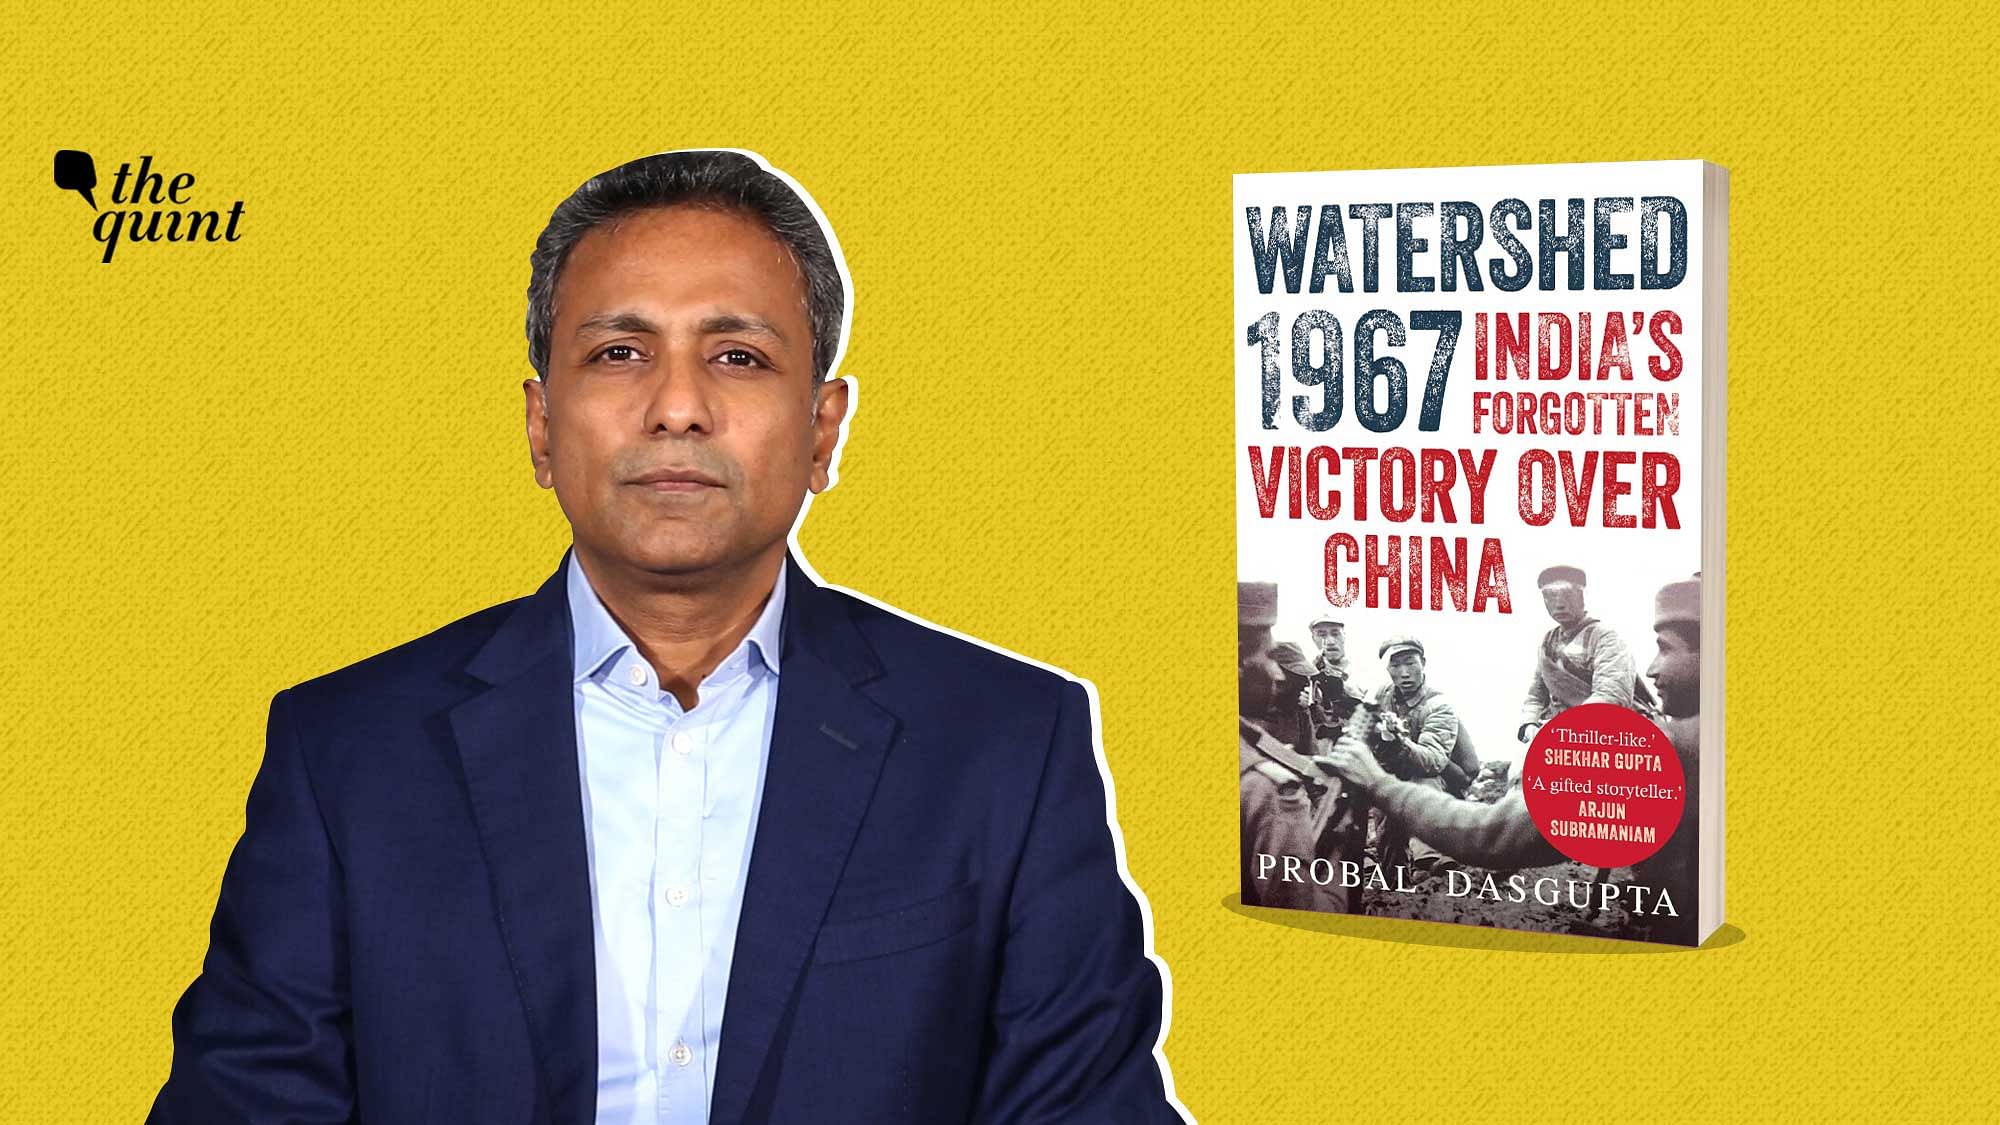 Army veteran Probal DasGupta’s book looks at the lasting impact that the 1967 battles fought between India and China had on the ties between the two countries.&nbsp;